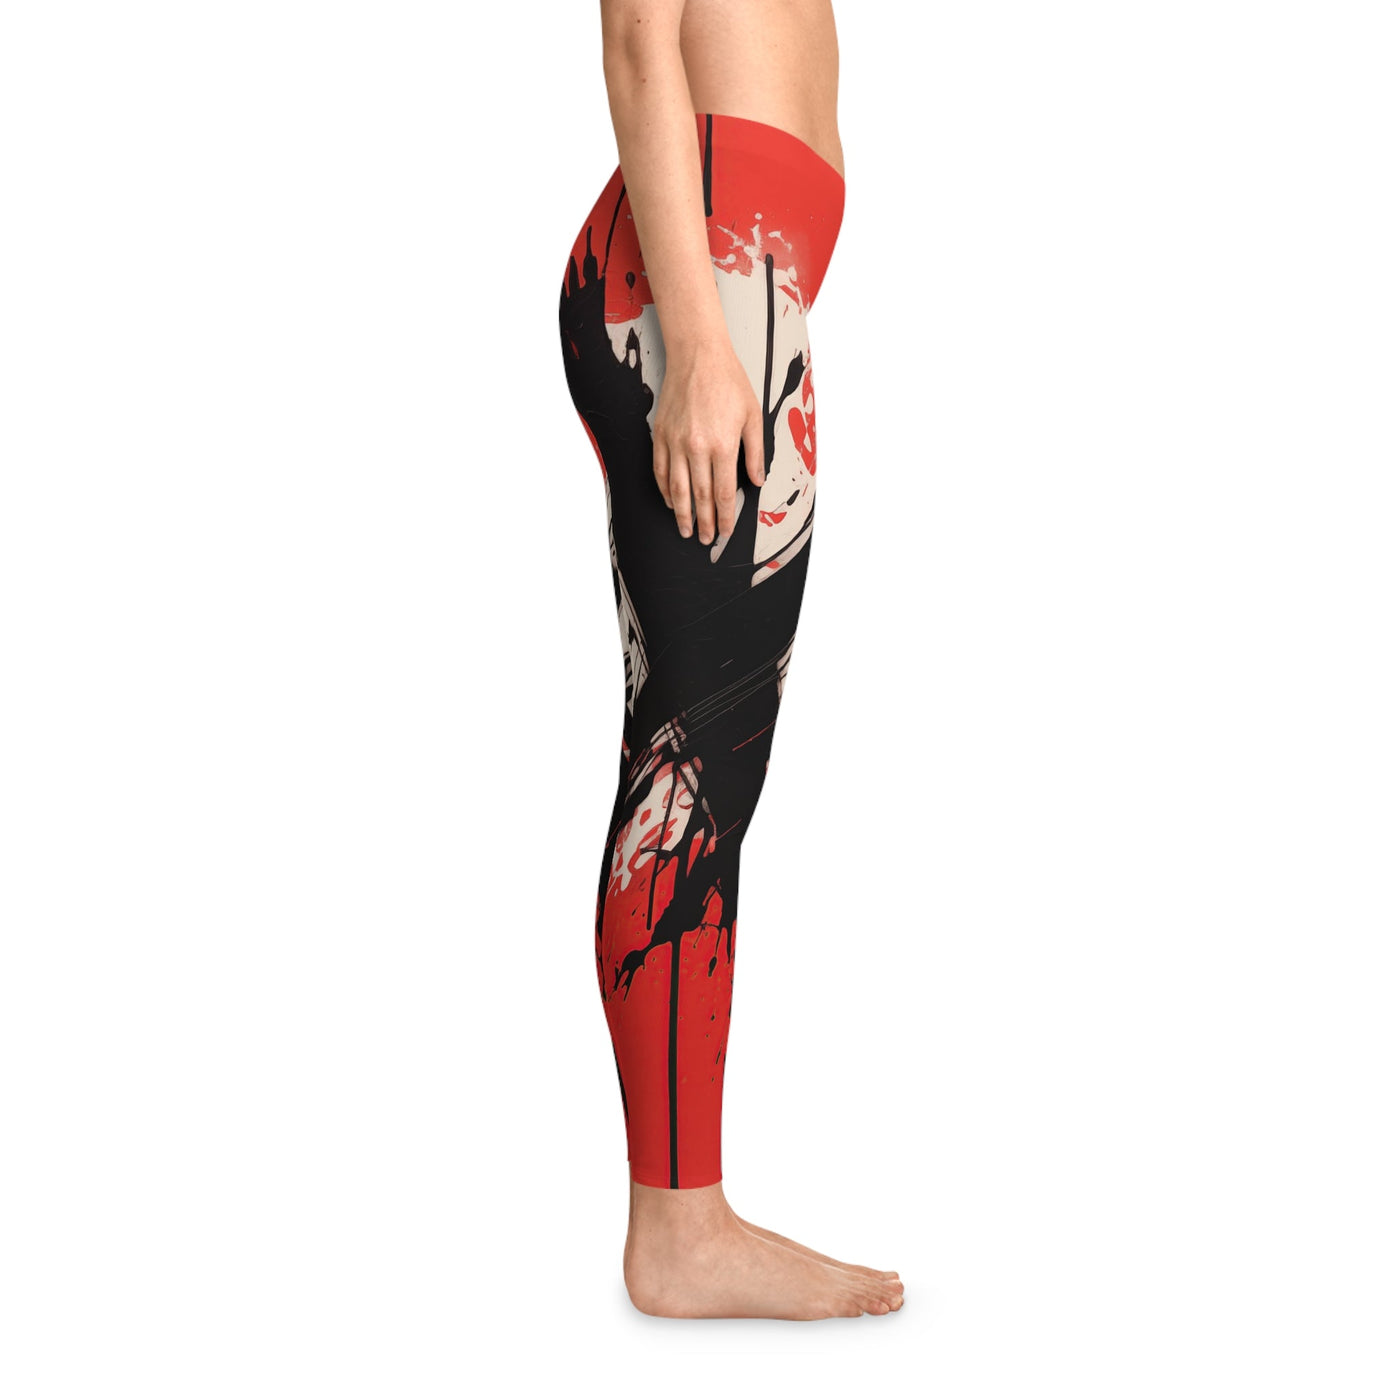 Abstract X Cross Stretching Leggings